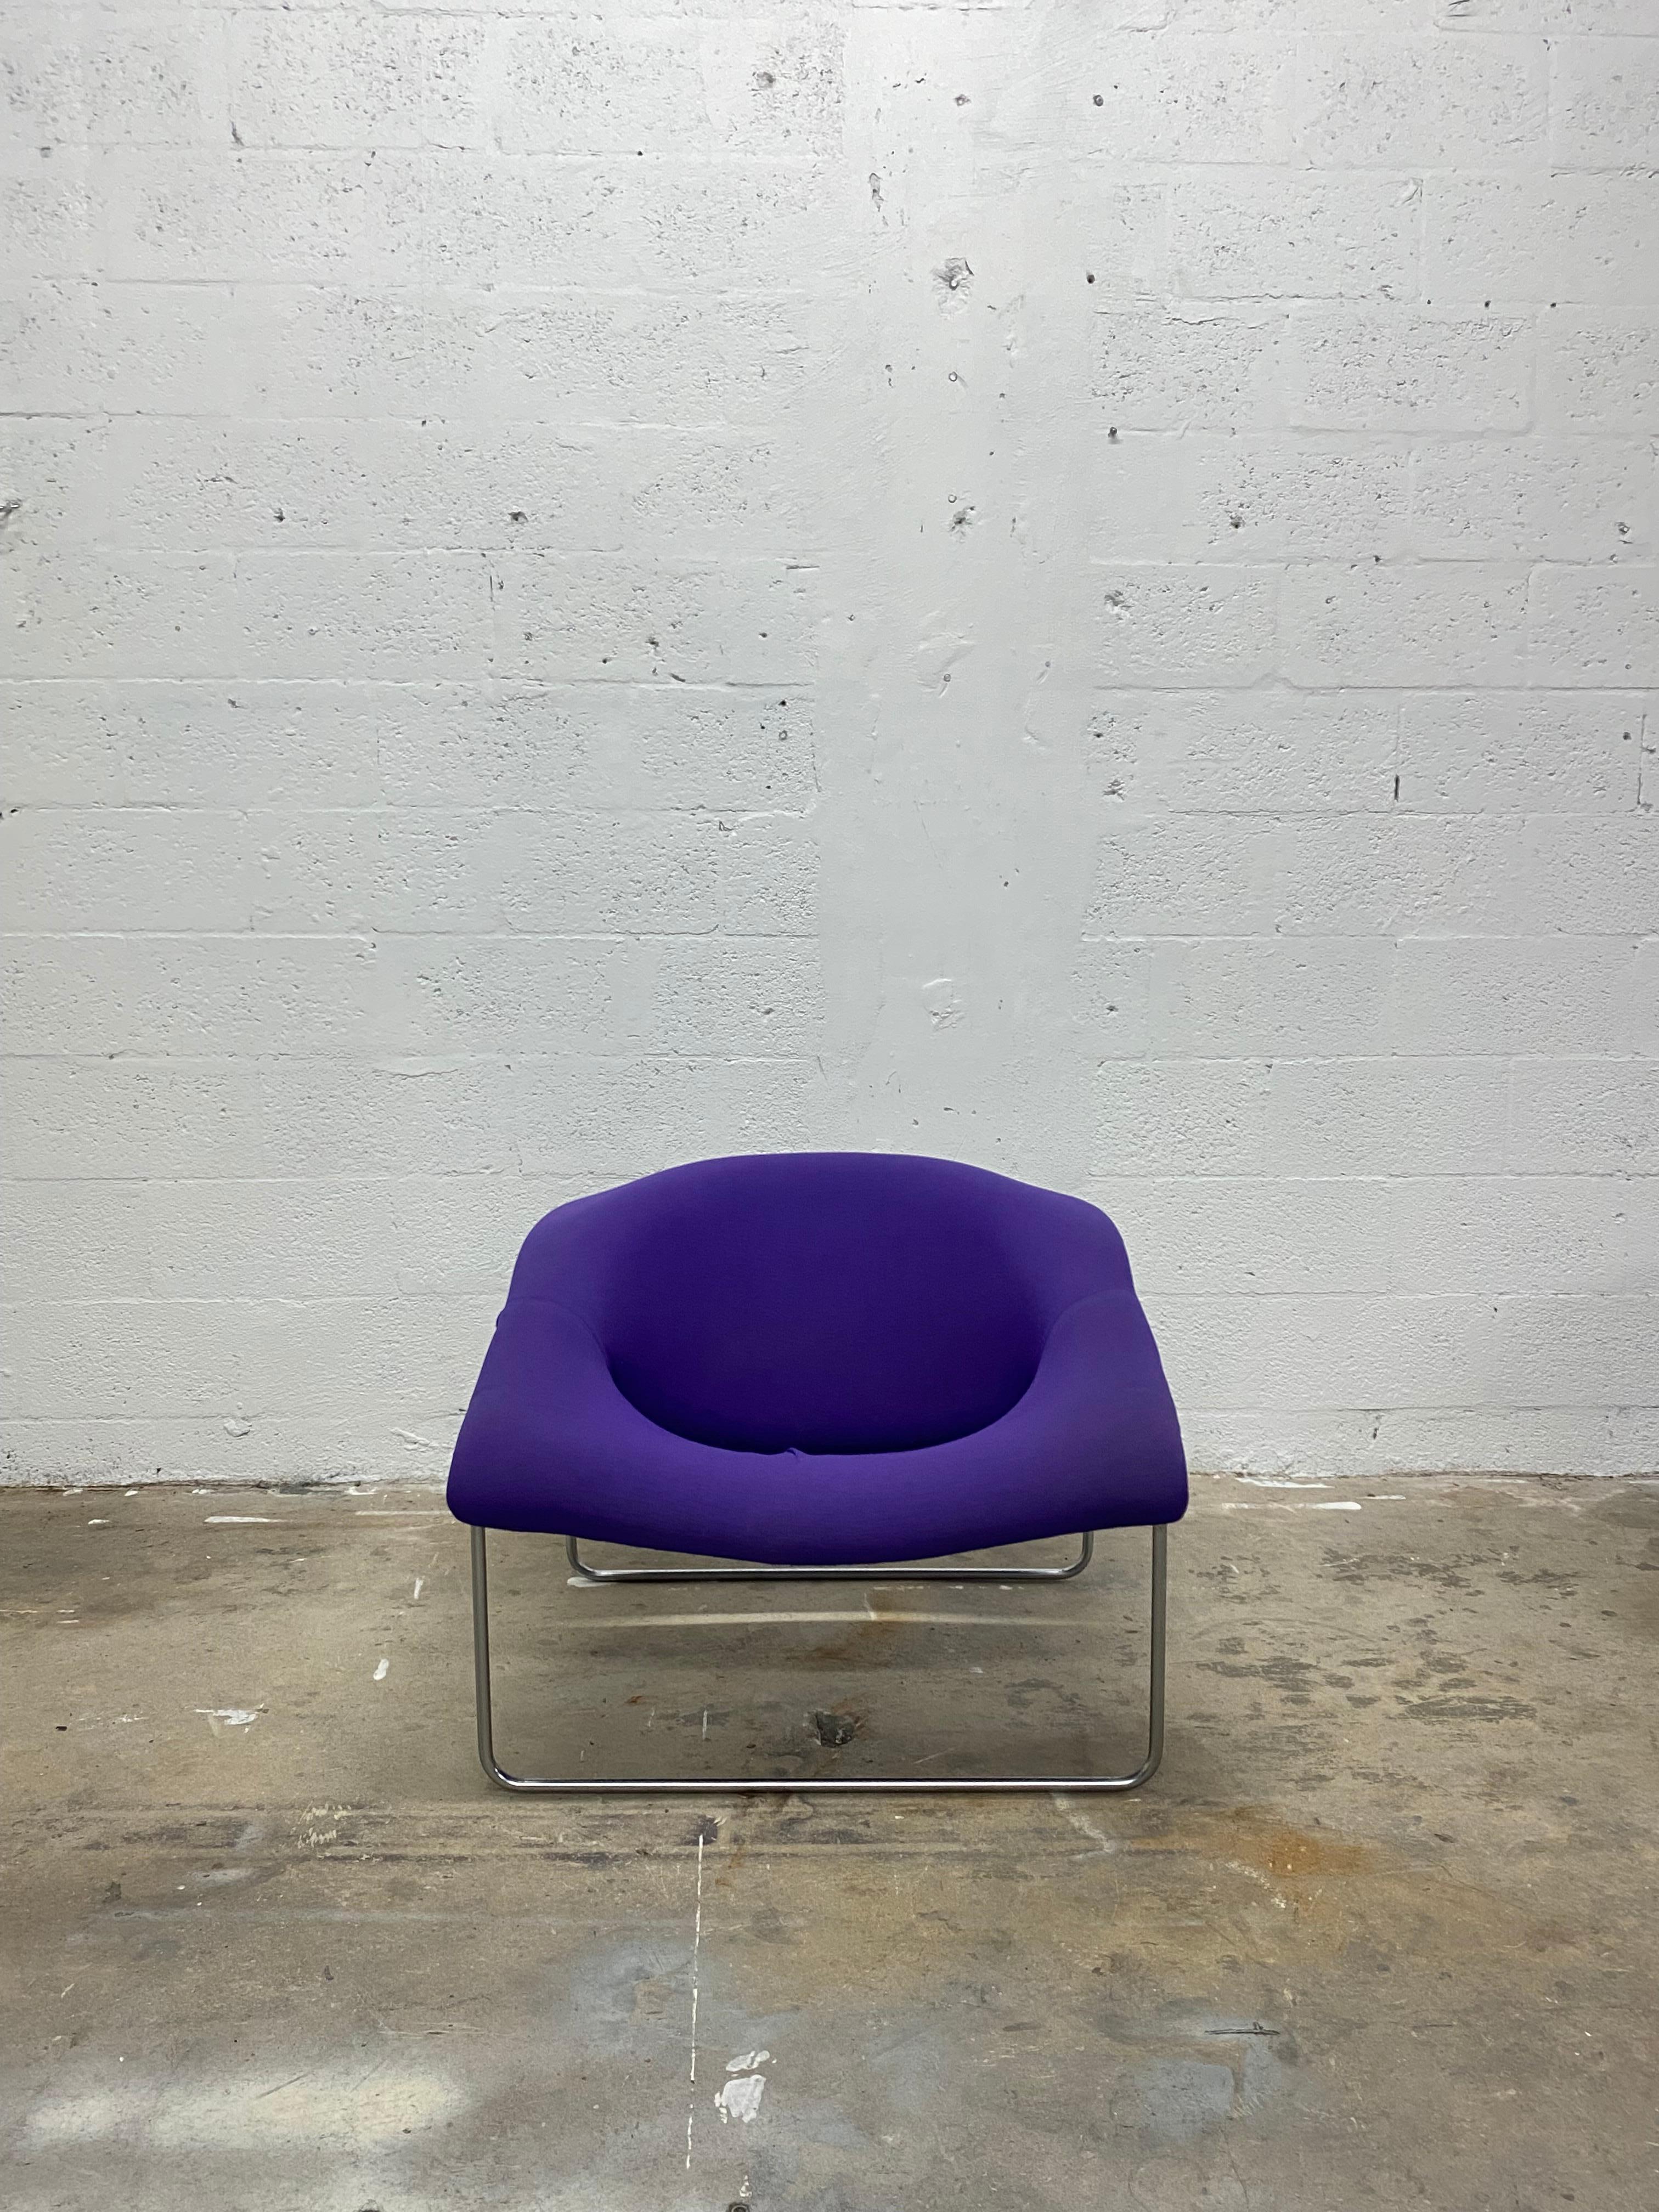 Rare and collectible Cubique lounge chairs with internal fiberglass shell wrapped in injected foam rubber, covered in original purple jersey like fabric with purple zipper and suspended from a metal wire frame. Original design by Olivier Mourgue and